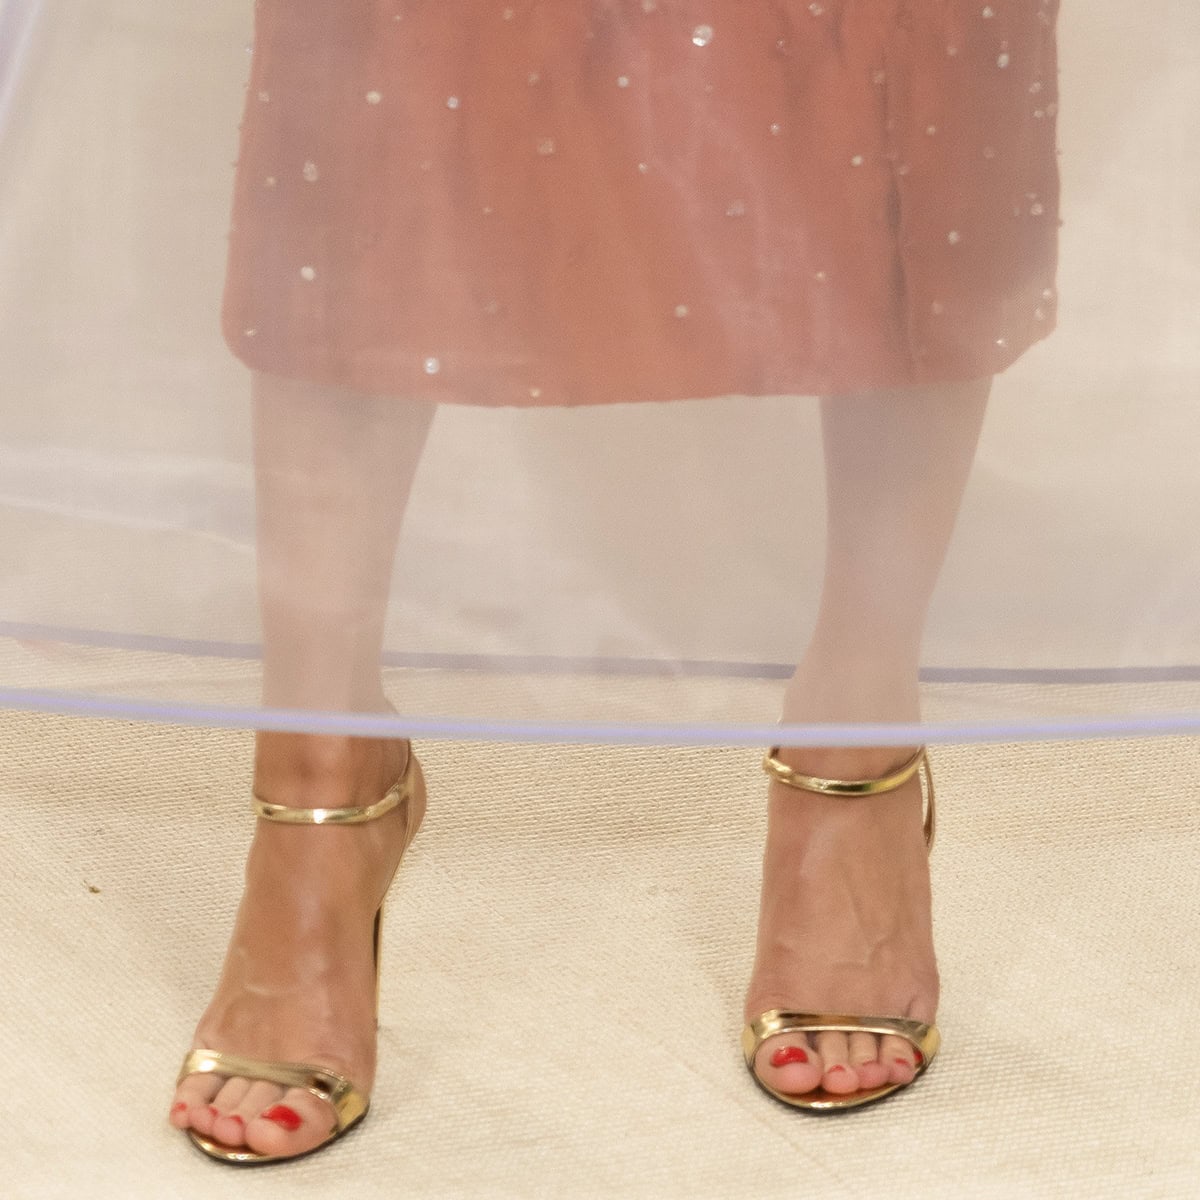 Brie Larson's choice of chic metallic gold sandals adds a touch of glamour to her ensemble, perfectly matching her polished red pedicure